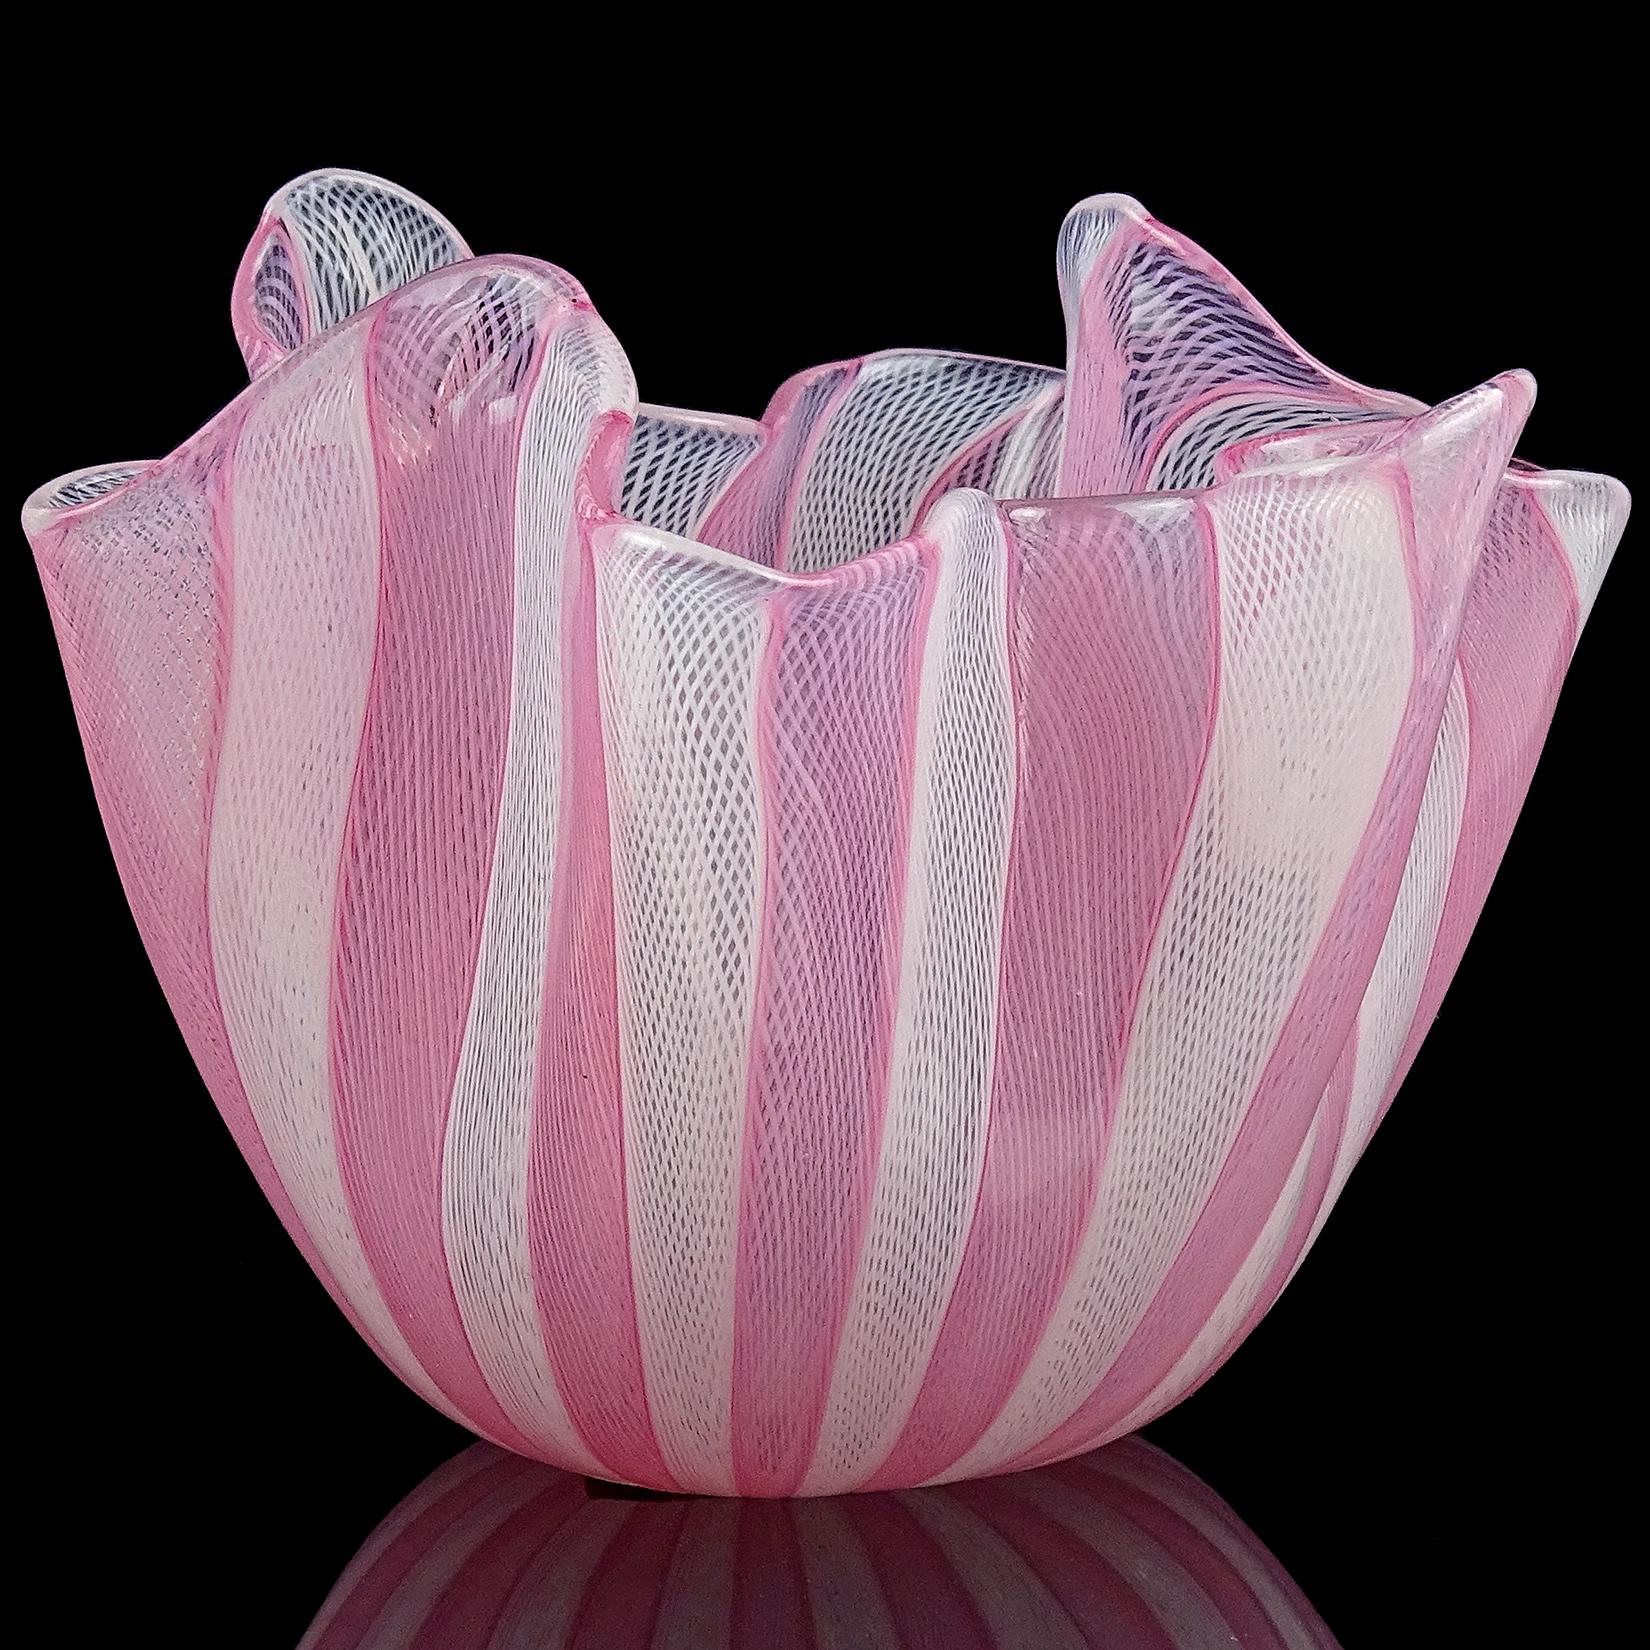 Beautiful Murano hand blown pink and white Italian art glass fazzoletto handkerchief vase. Documented to Fulvio Bianconi and Paolo Venini, for Venini. The piece is signed underneath, with part of the 